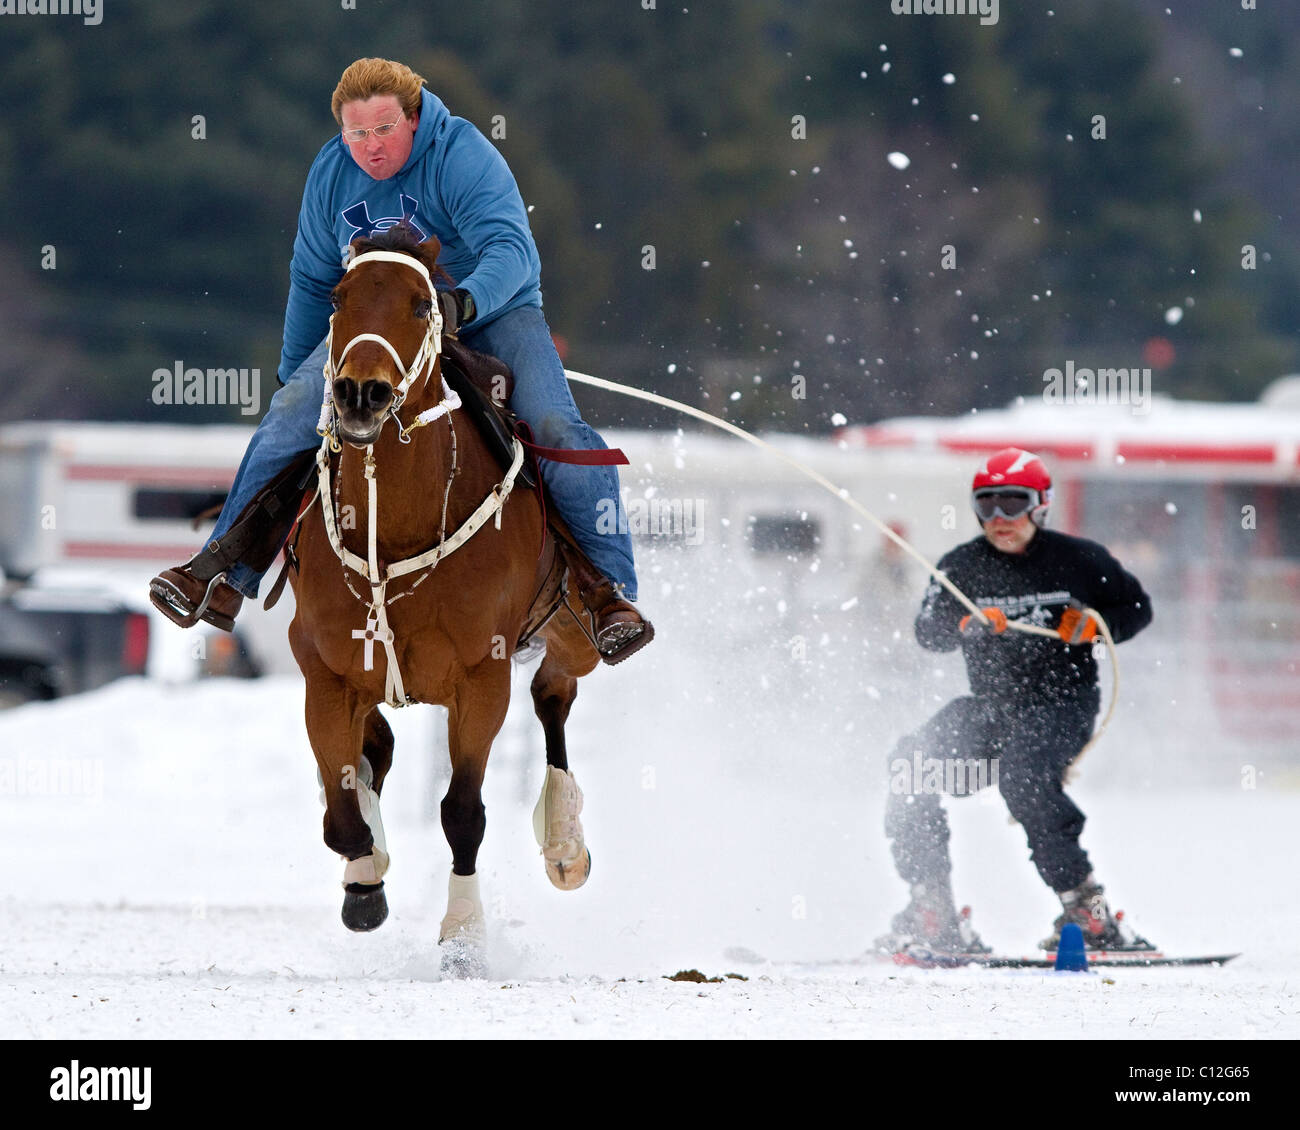 Horse and rider running in the snow while towing a skier during a ski joring, skijoring race in New Hampshire, New England. Stock Photo